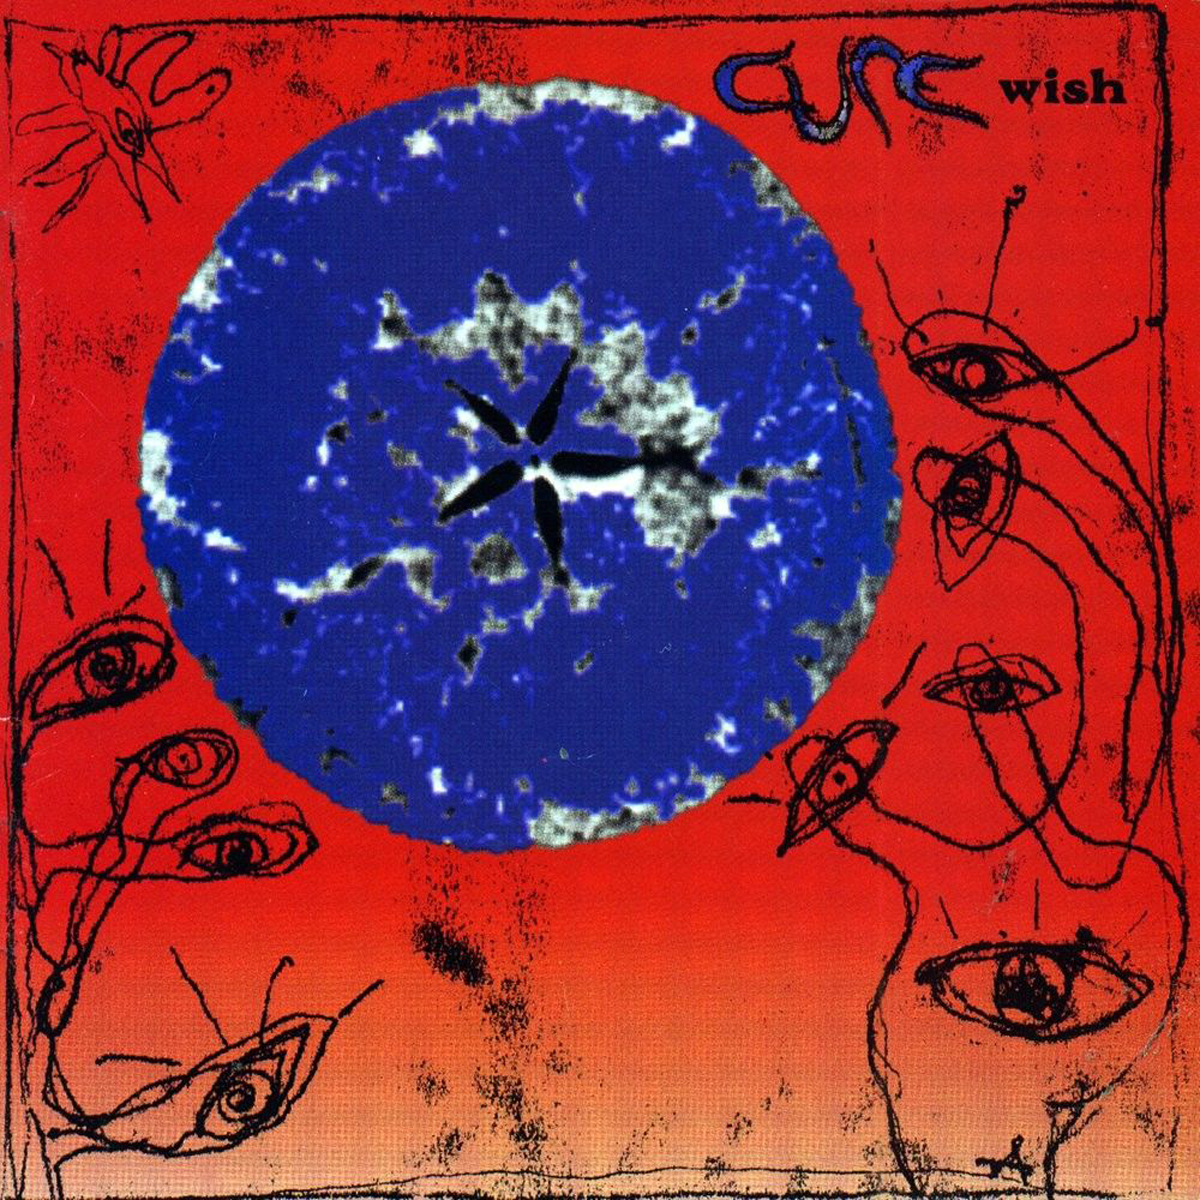 Cure reissuing Wish in anniversary